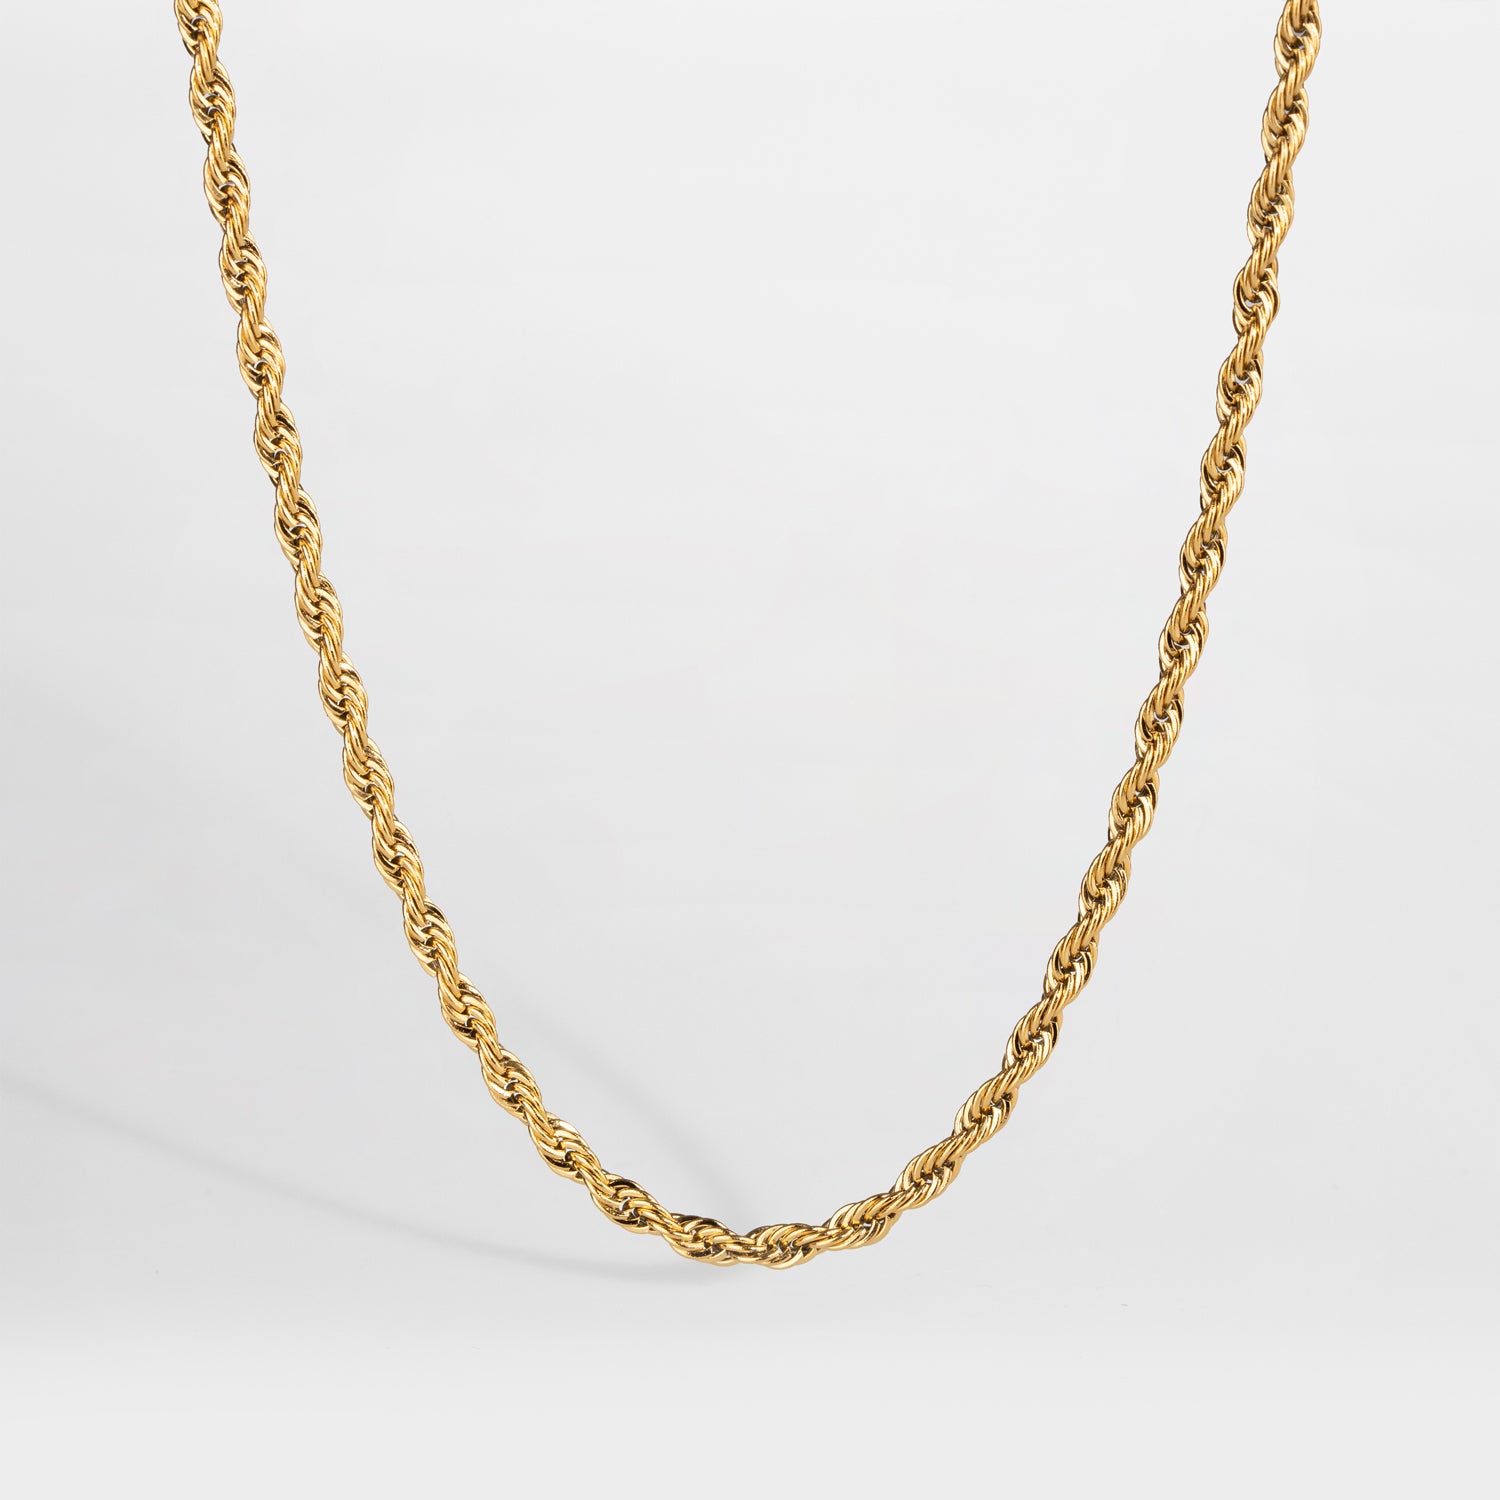 NL Rope necklace - Gold-toned